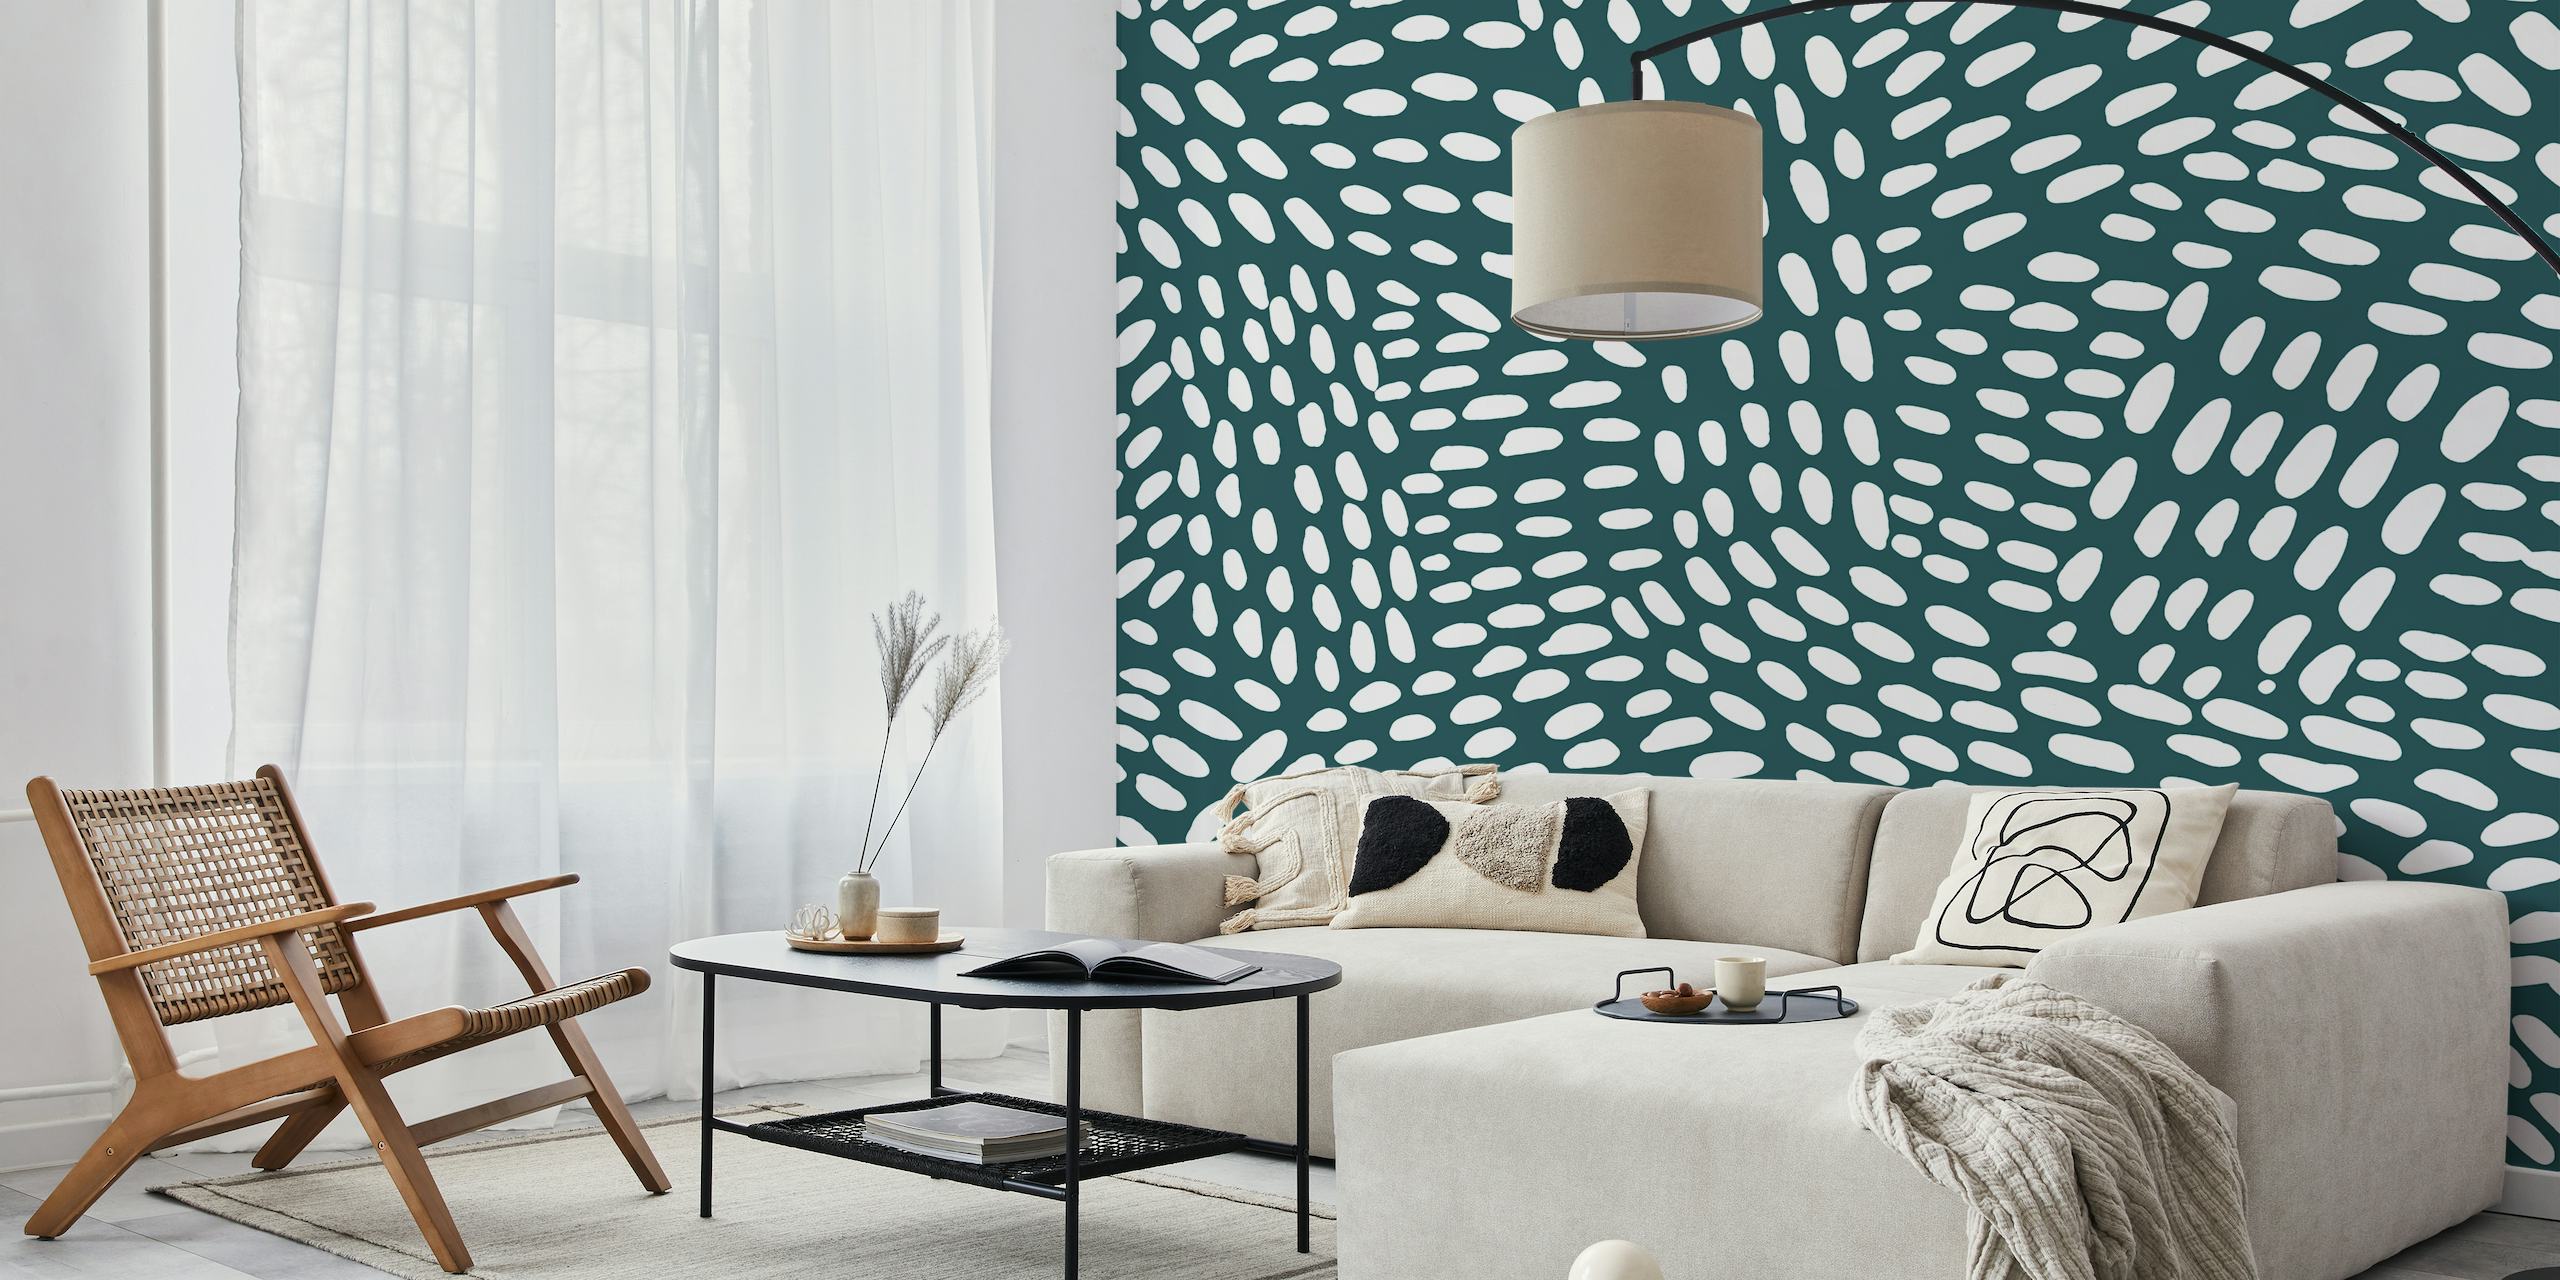 Dotted lines on teal wallpaper